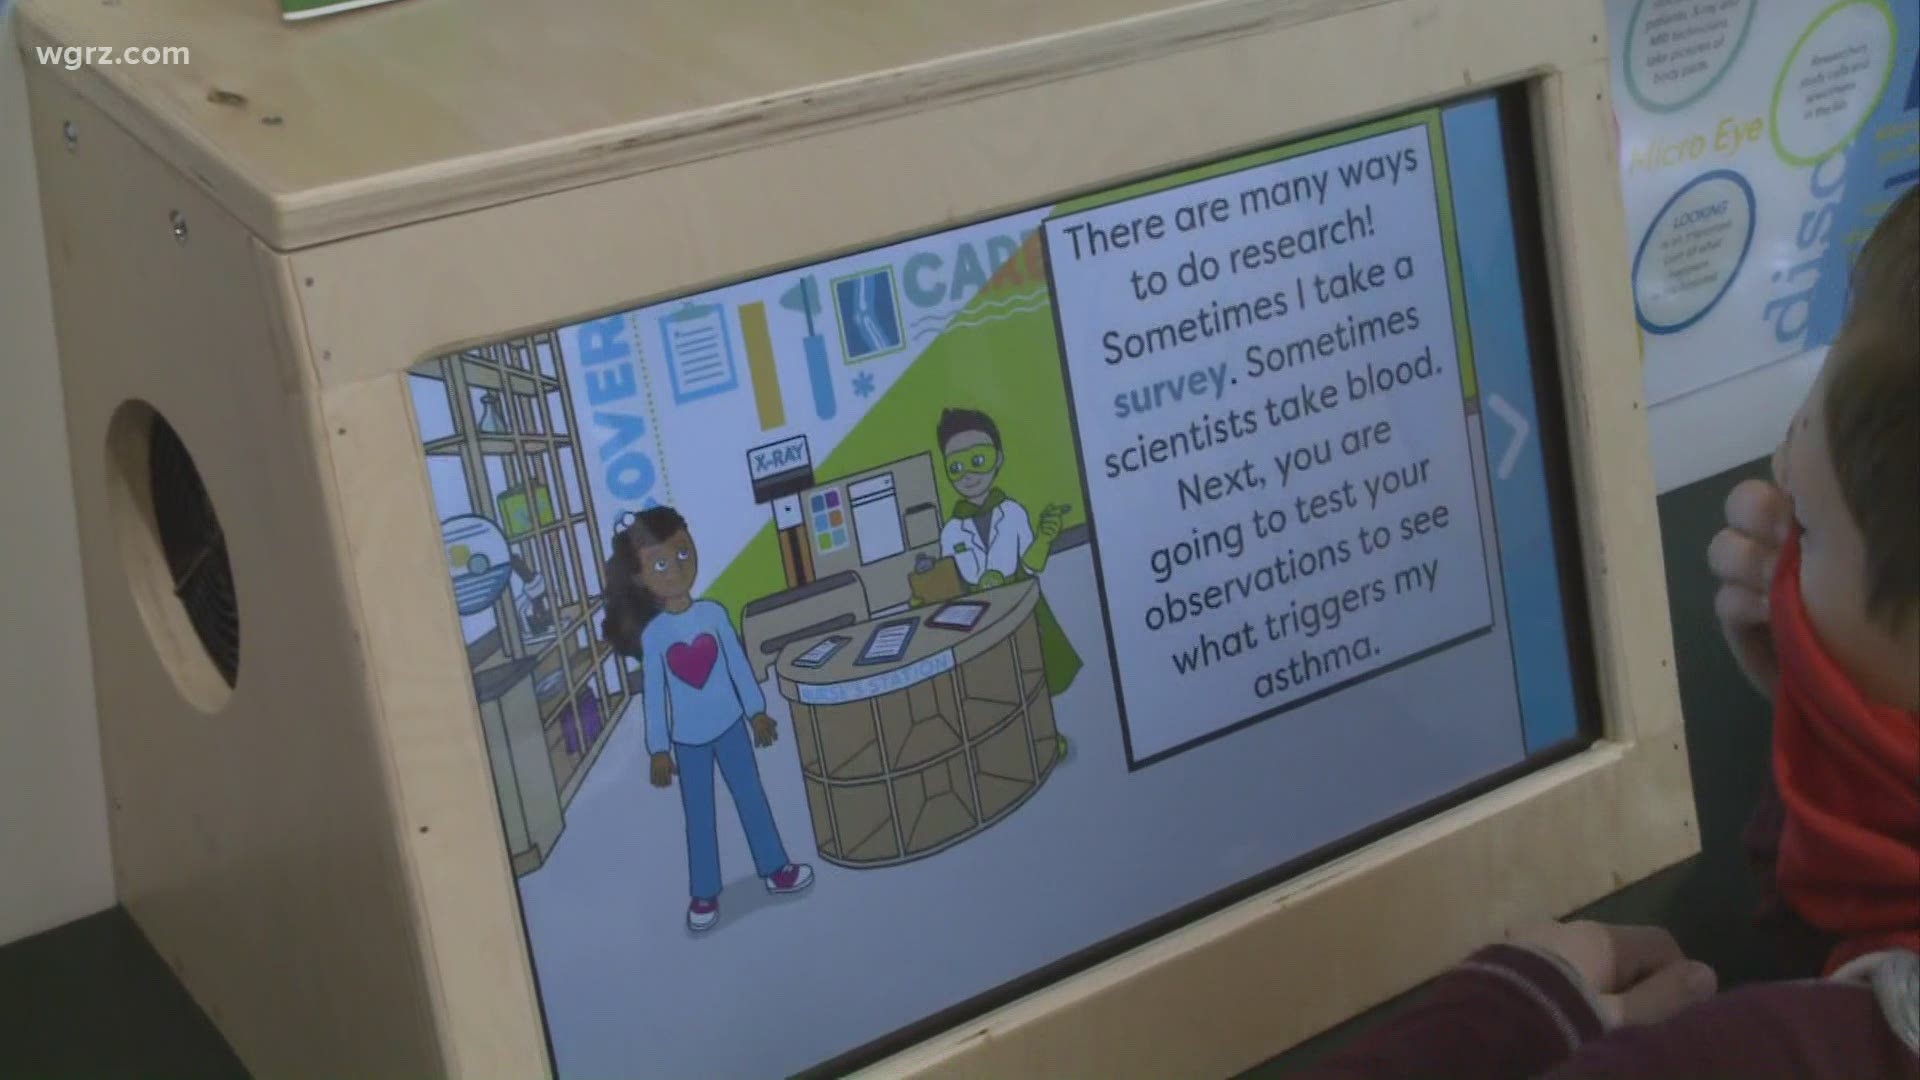 Children's activity book "Sofia Learns about Research" is coming to life as a video game.